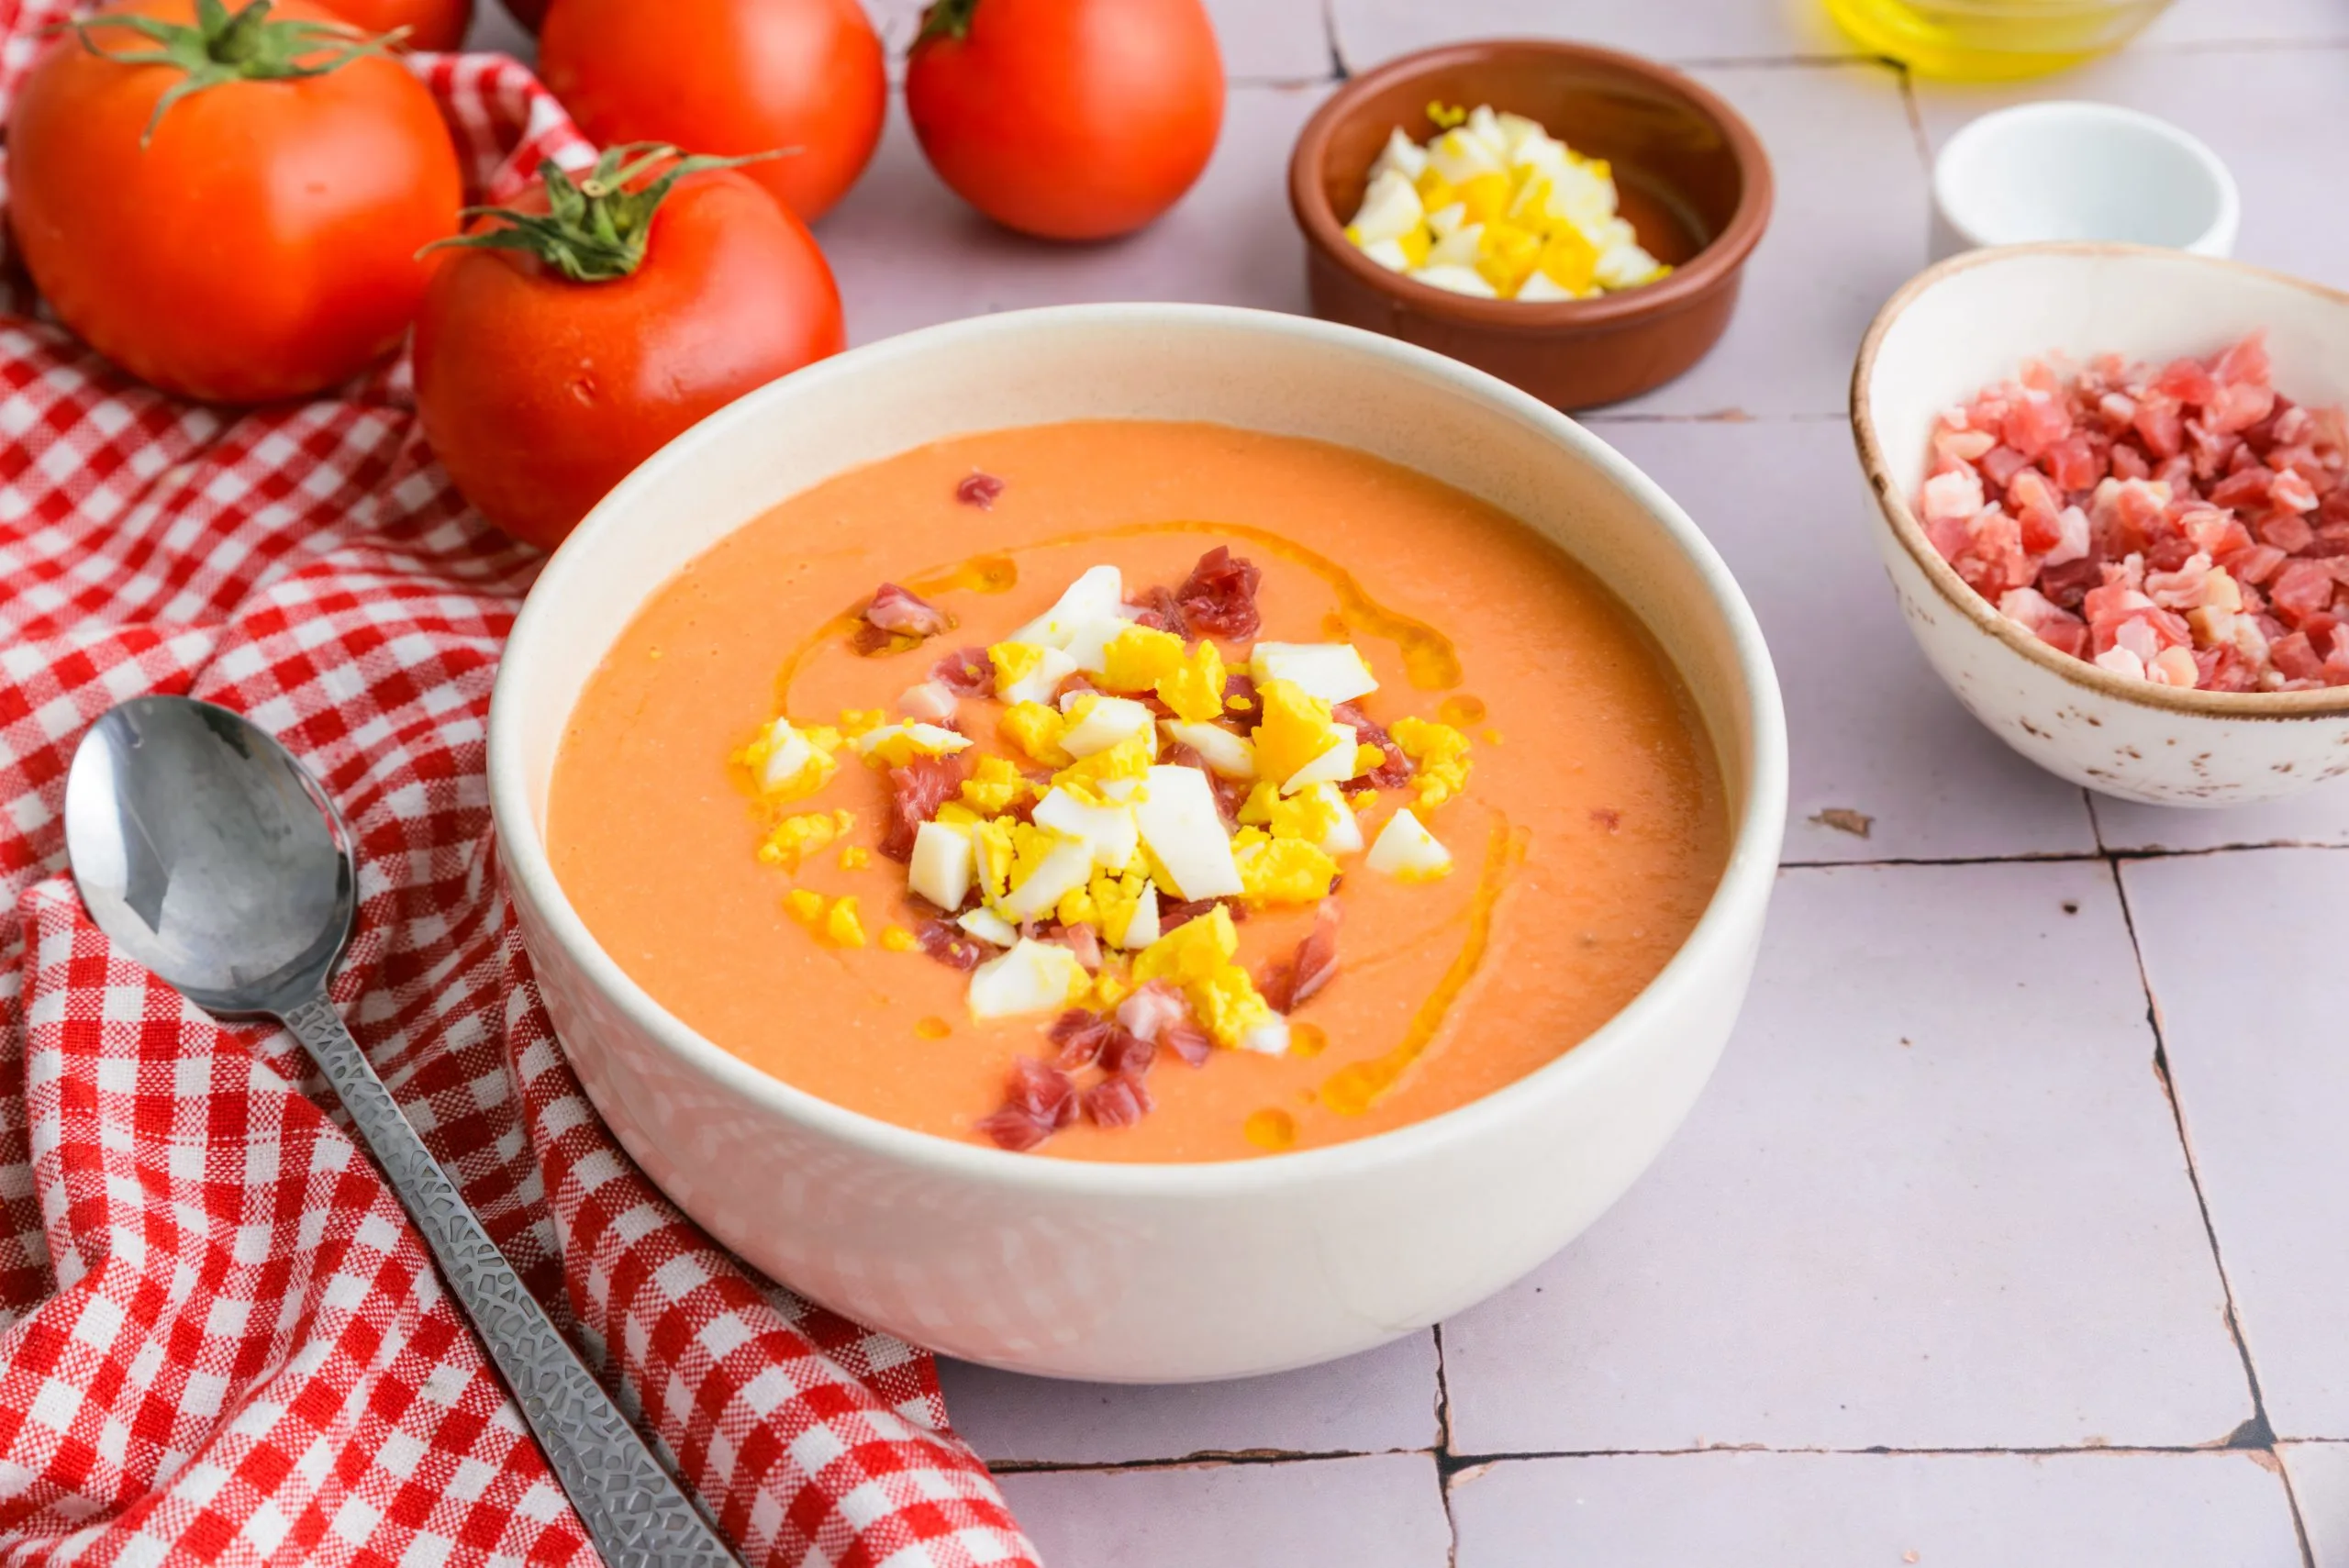 Salmorejo Andalusian Cold Tomato Soup served in a white bowl